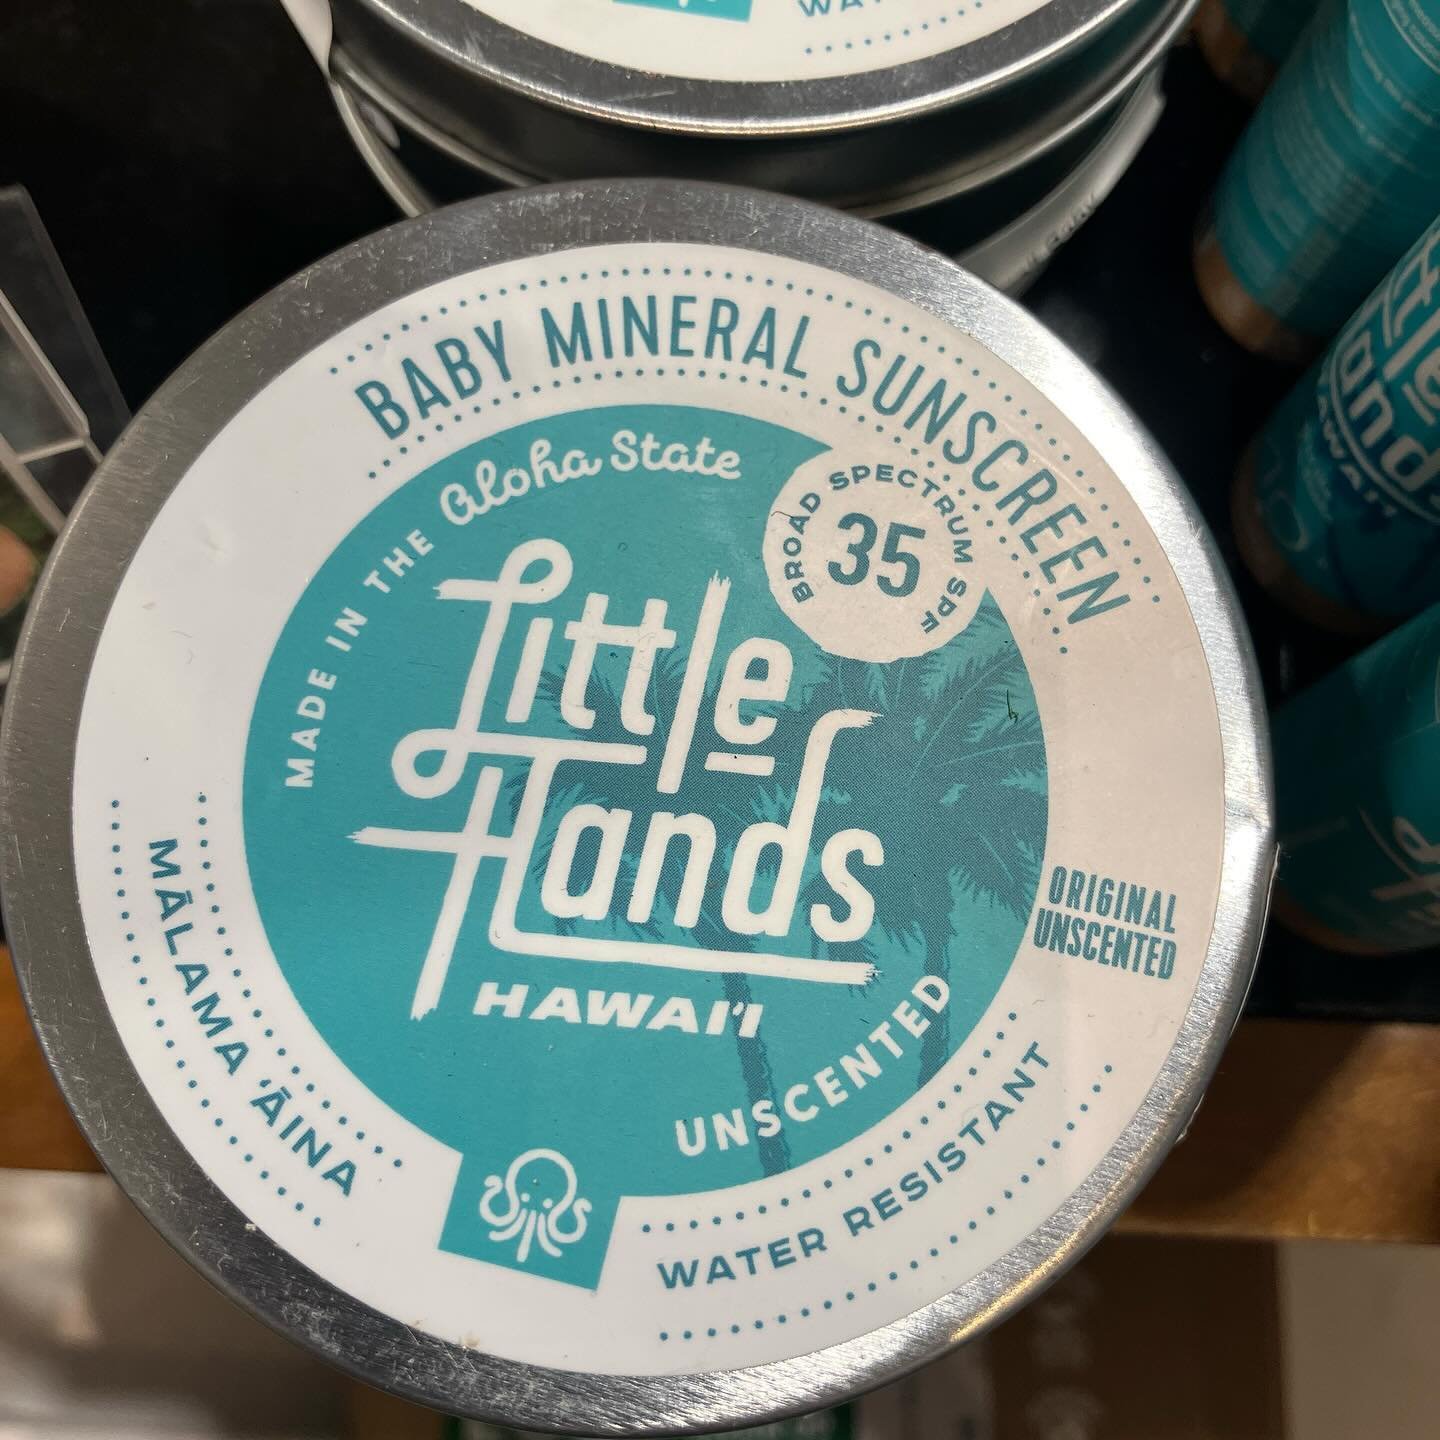 Summer is coming! Are you stocked up on sunscreen? We are! Try @littlehandshawaii mineral sunscreen, made with love for humans and oceans, in Hawaii, using all natural ingredients, packaged in plastic-free containers. We now have the head to toe stic